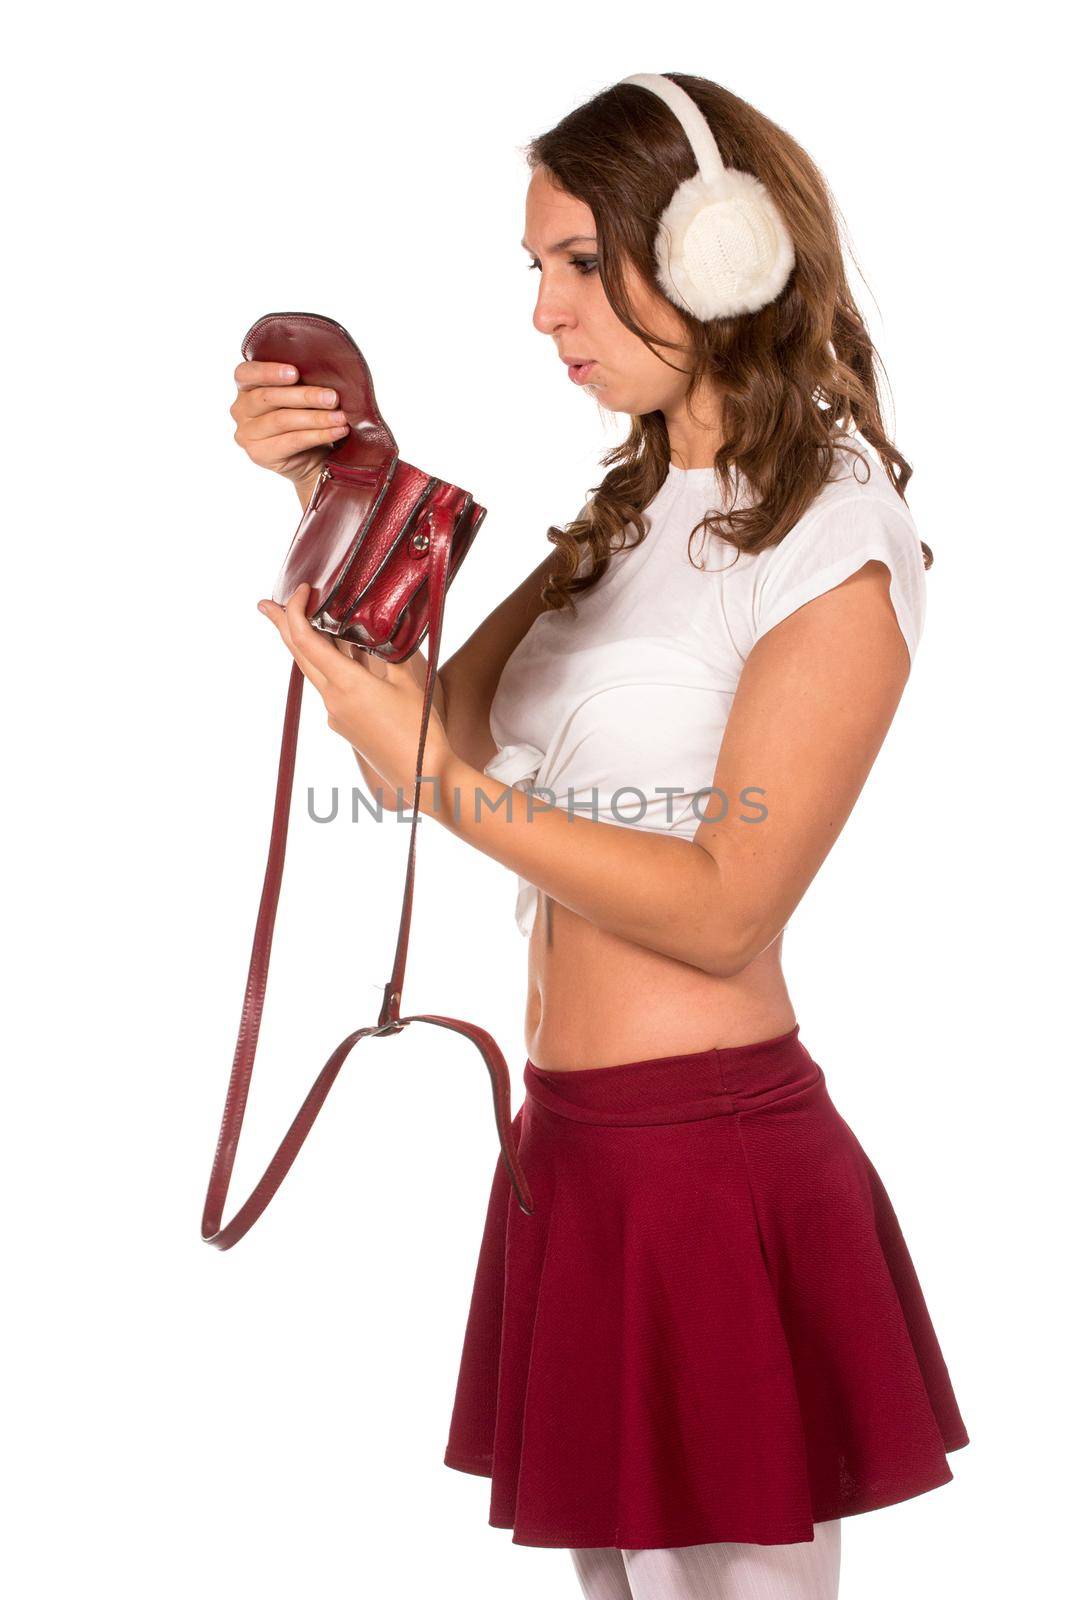 Beautiful woman looking through her pocket book purse by gsdonlin